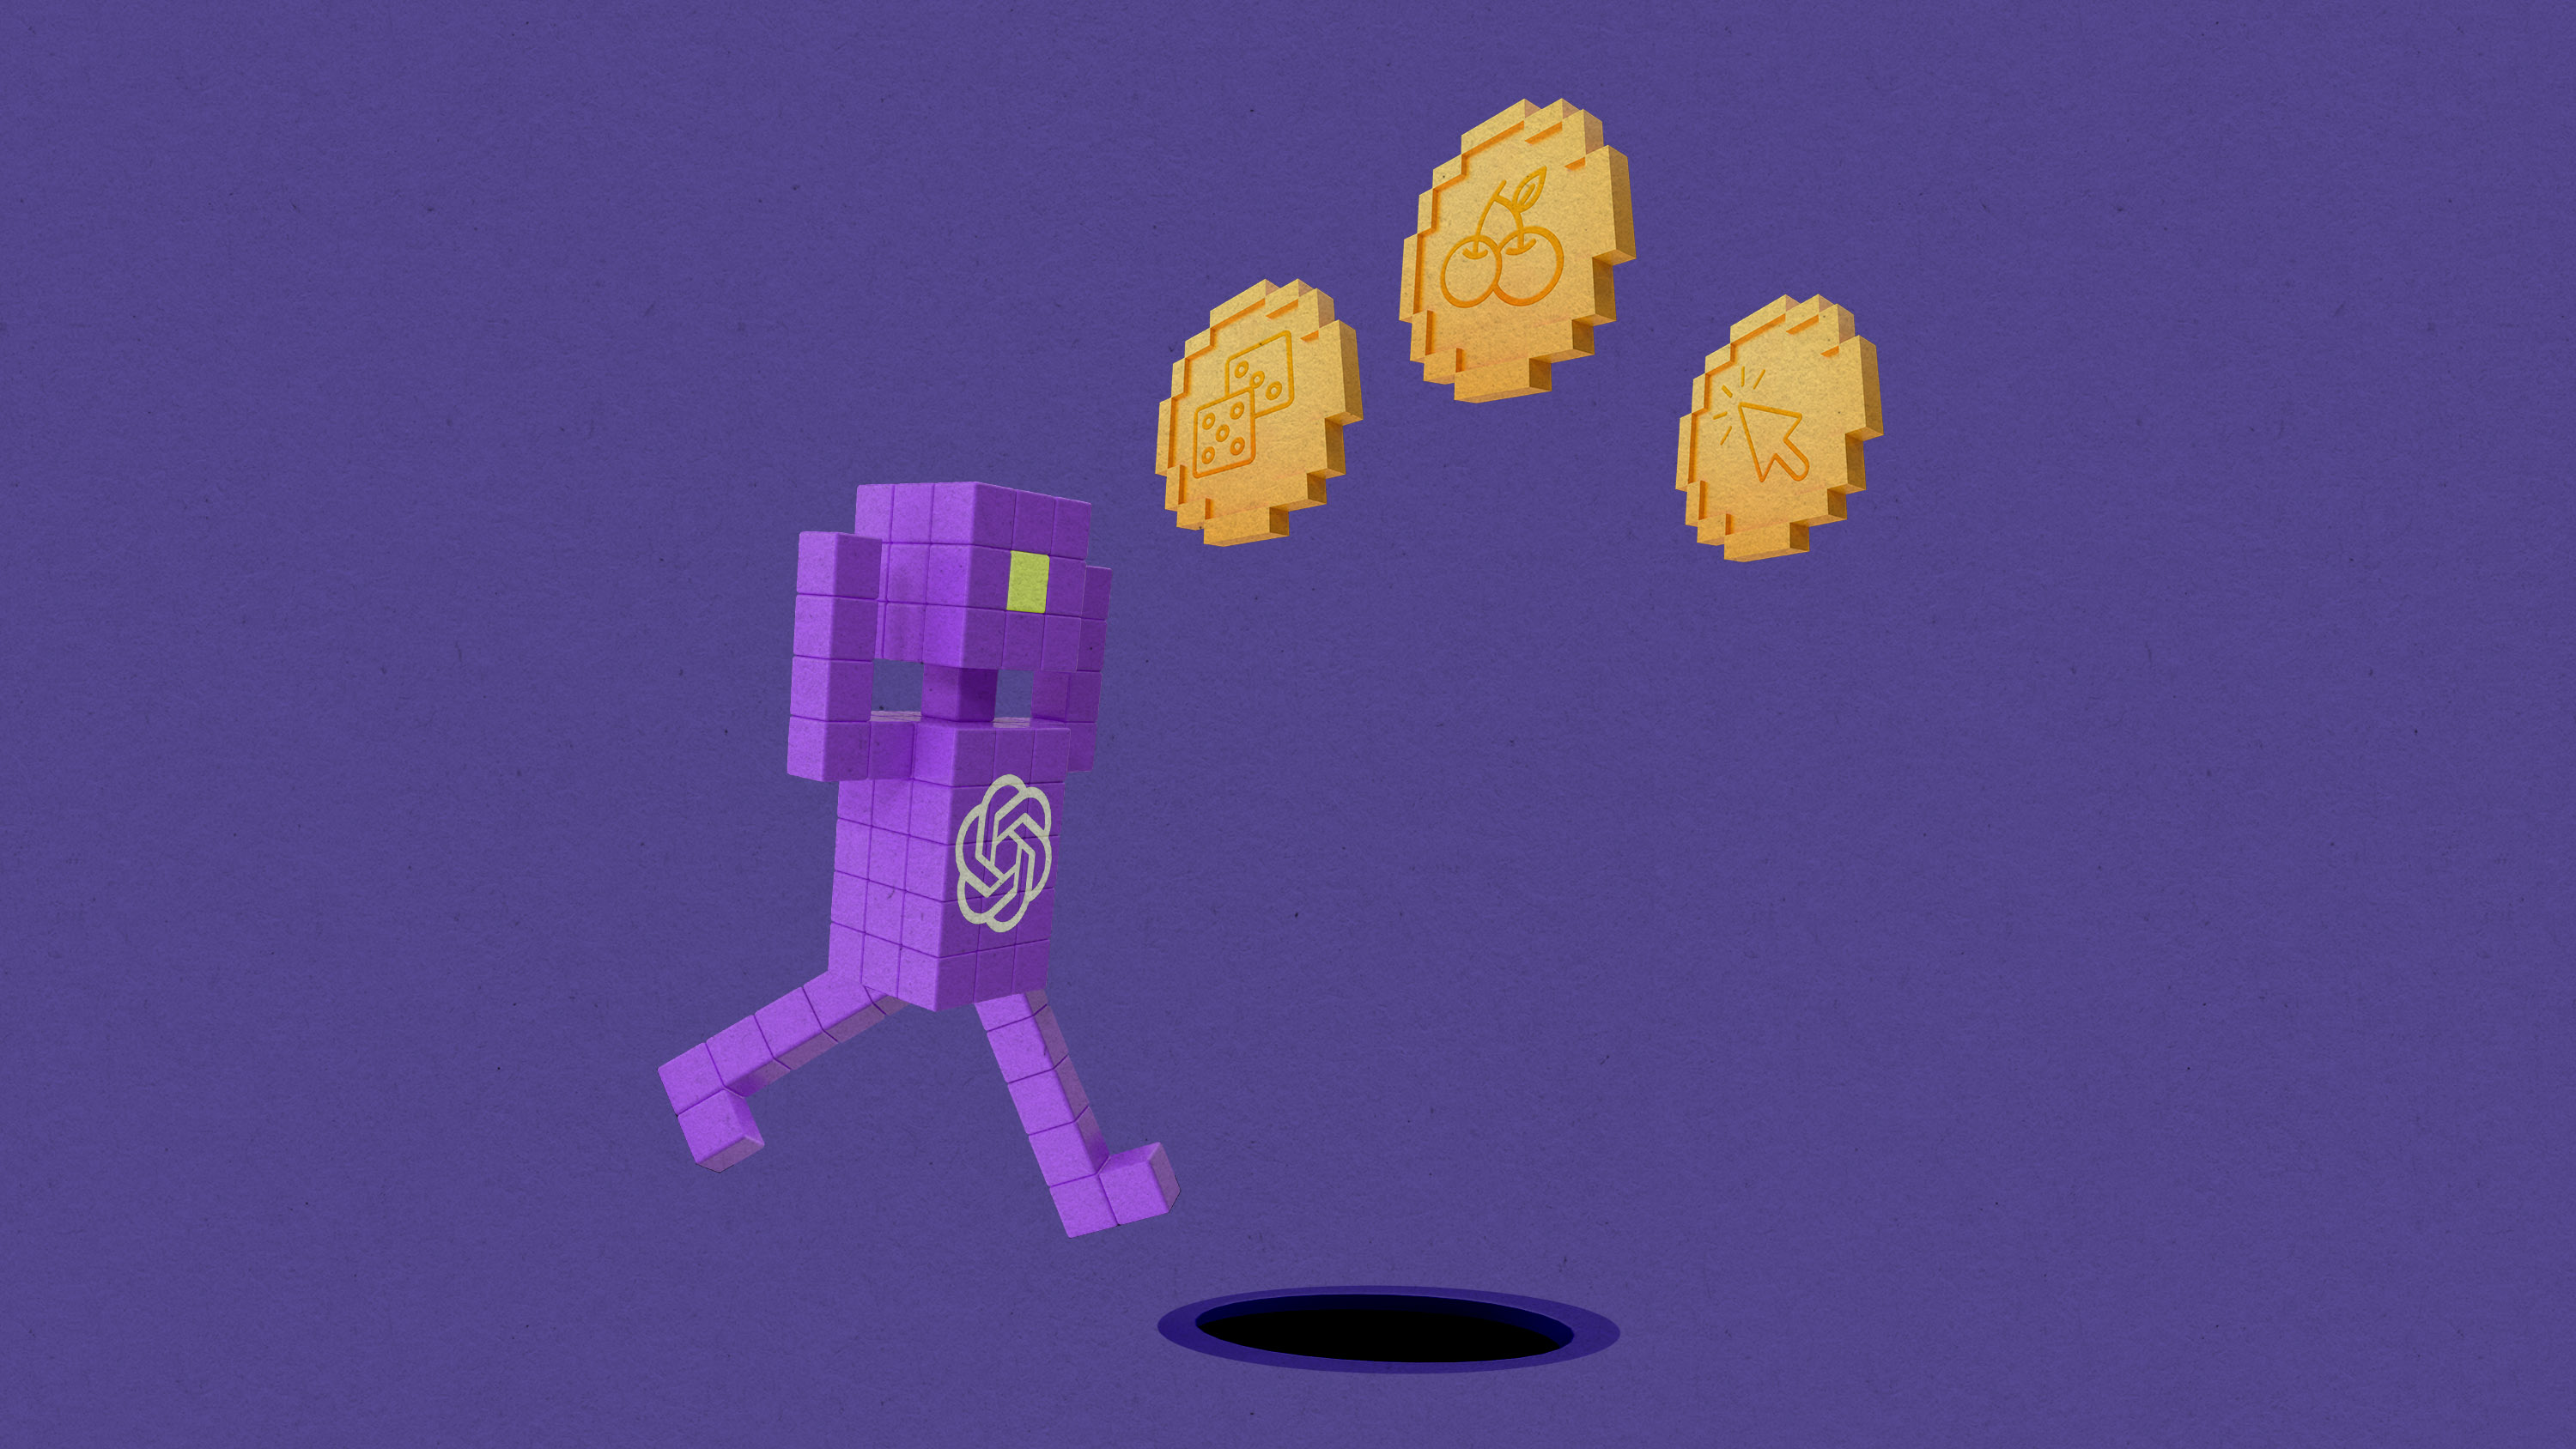 a voxel character with the OpenAI logi runs headlong toward tokens with dice, cherries and a cursor without noticing the hole open at its feet